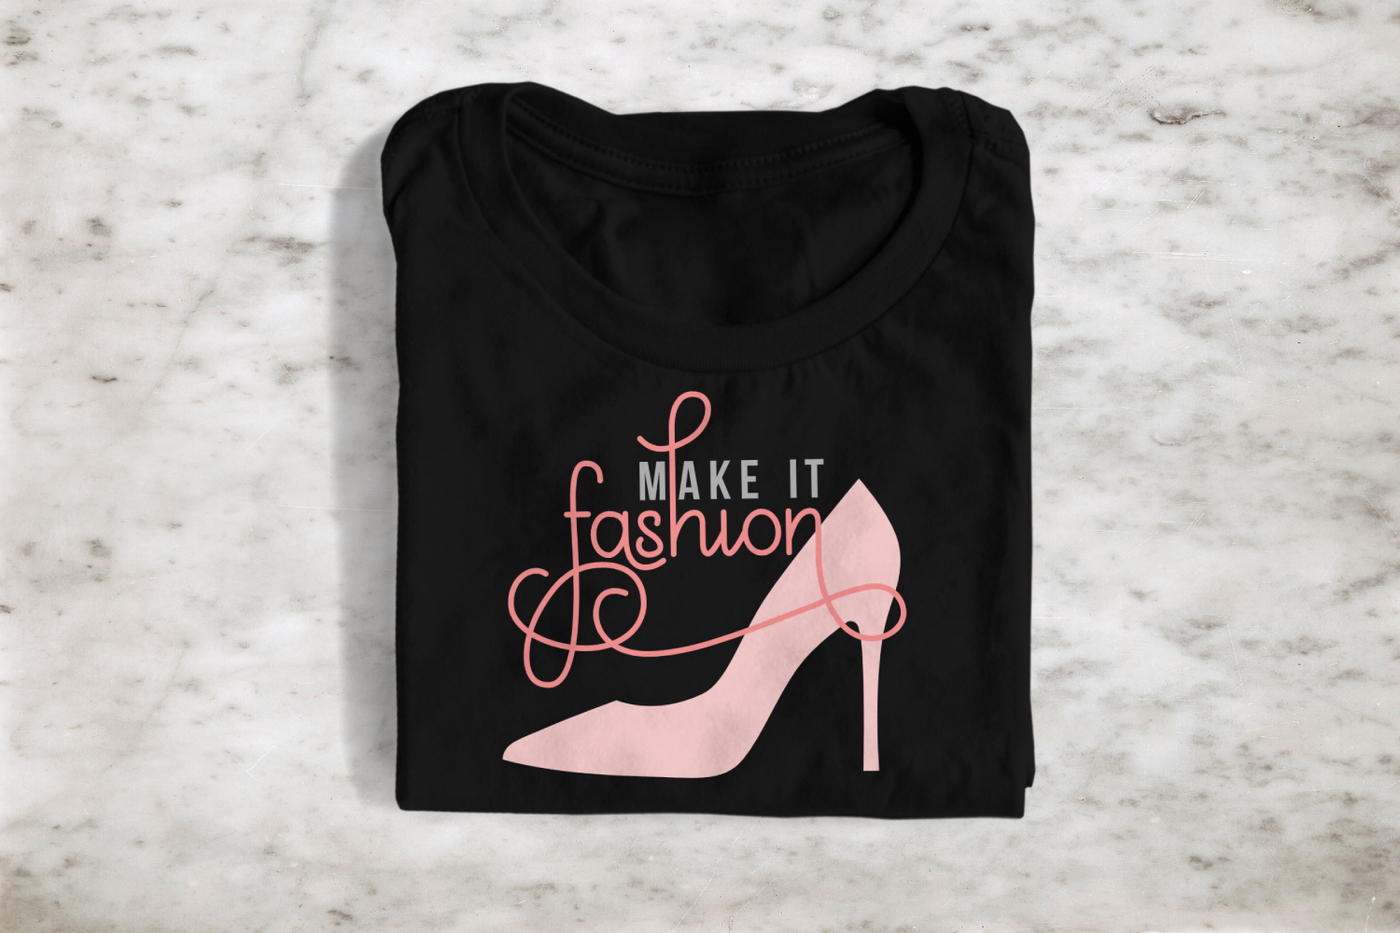 High heel shoe design with the quote "make it fashion"